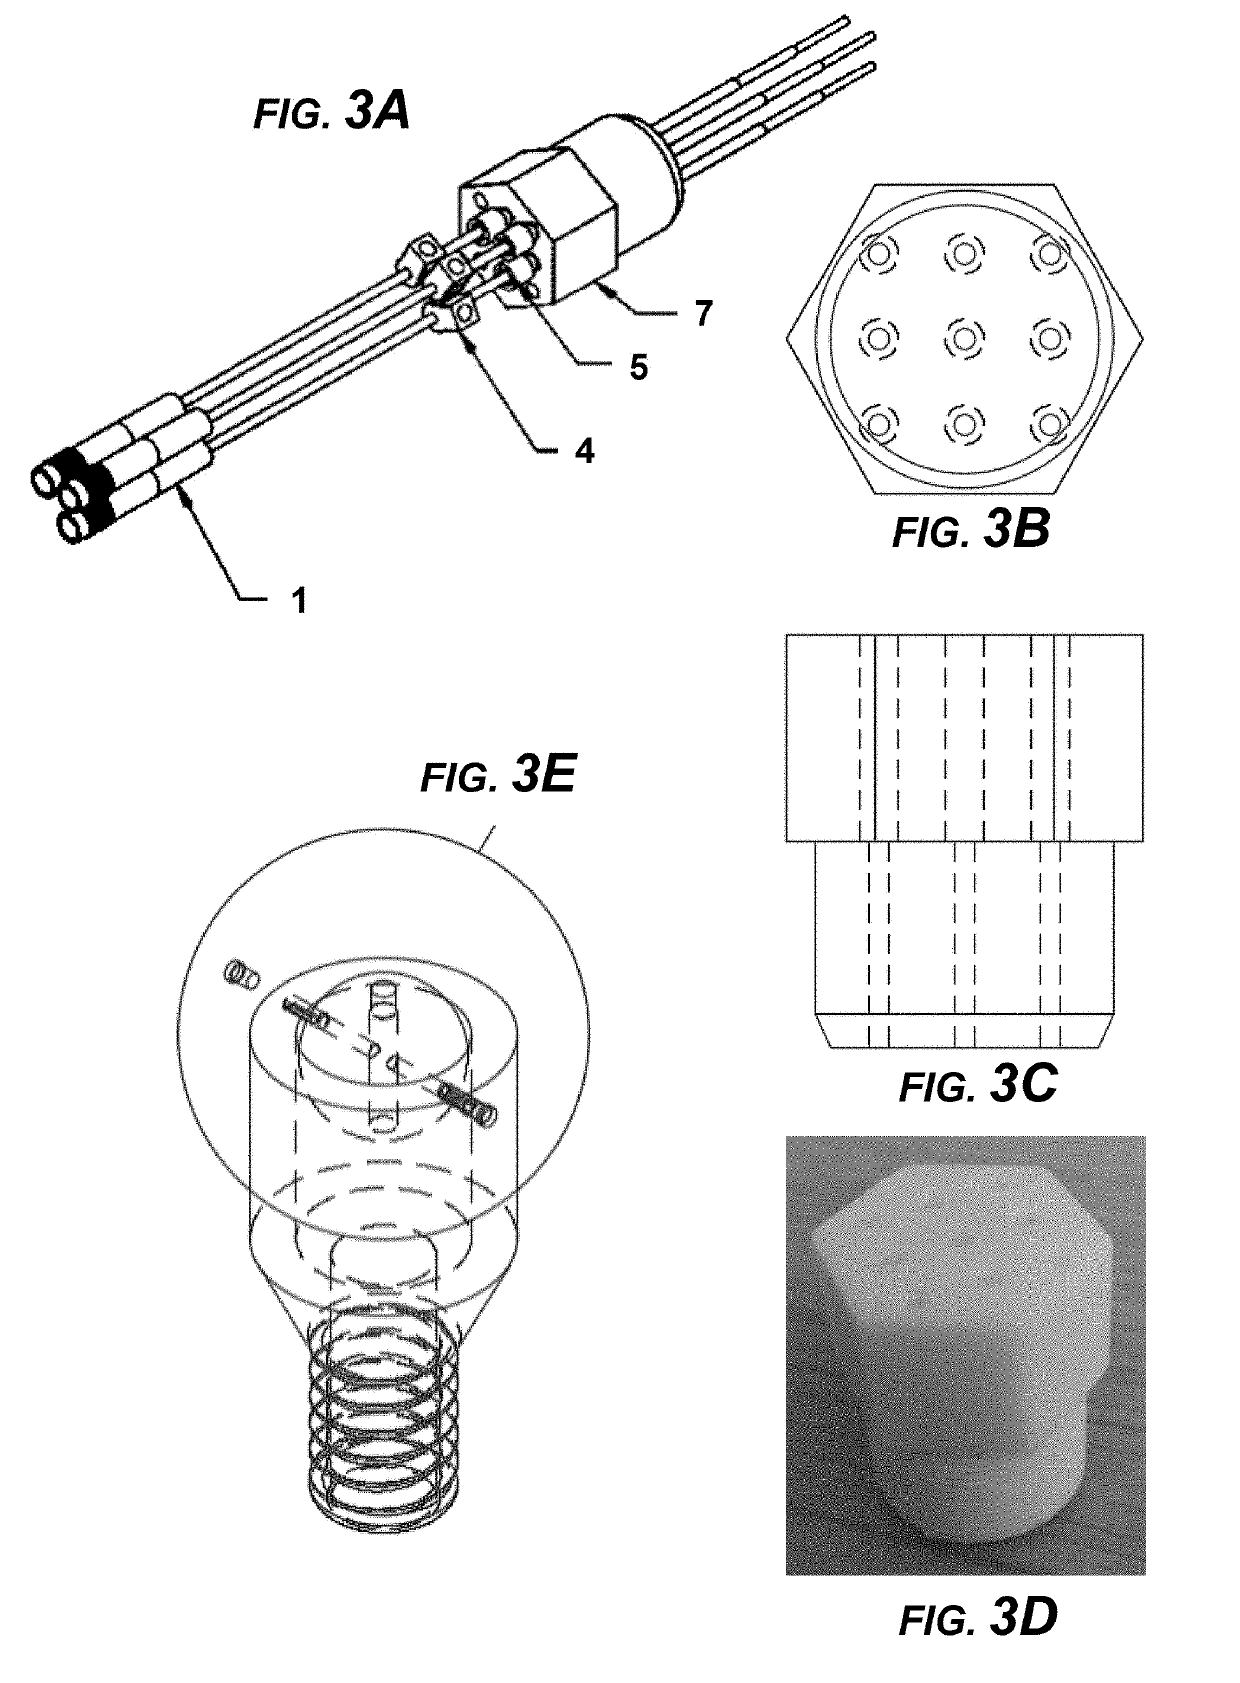 Method for treating neurological disorders, including tumors, with electroporation